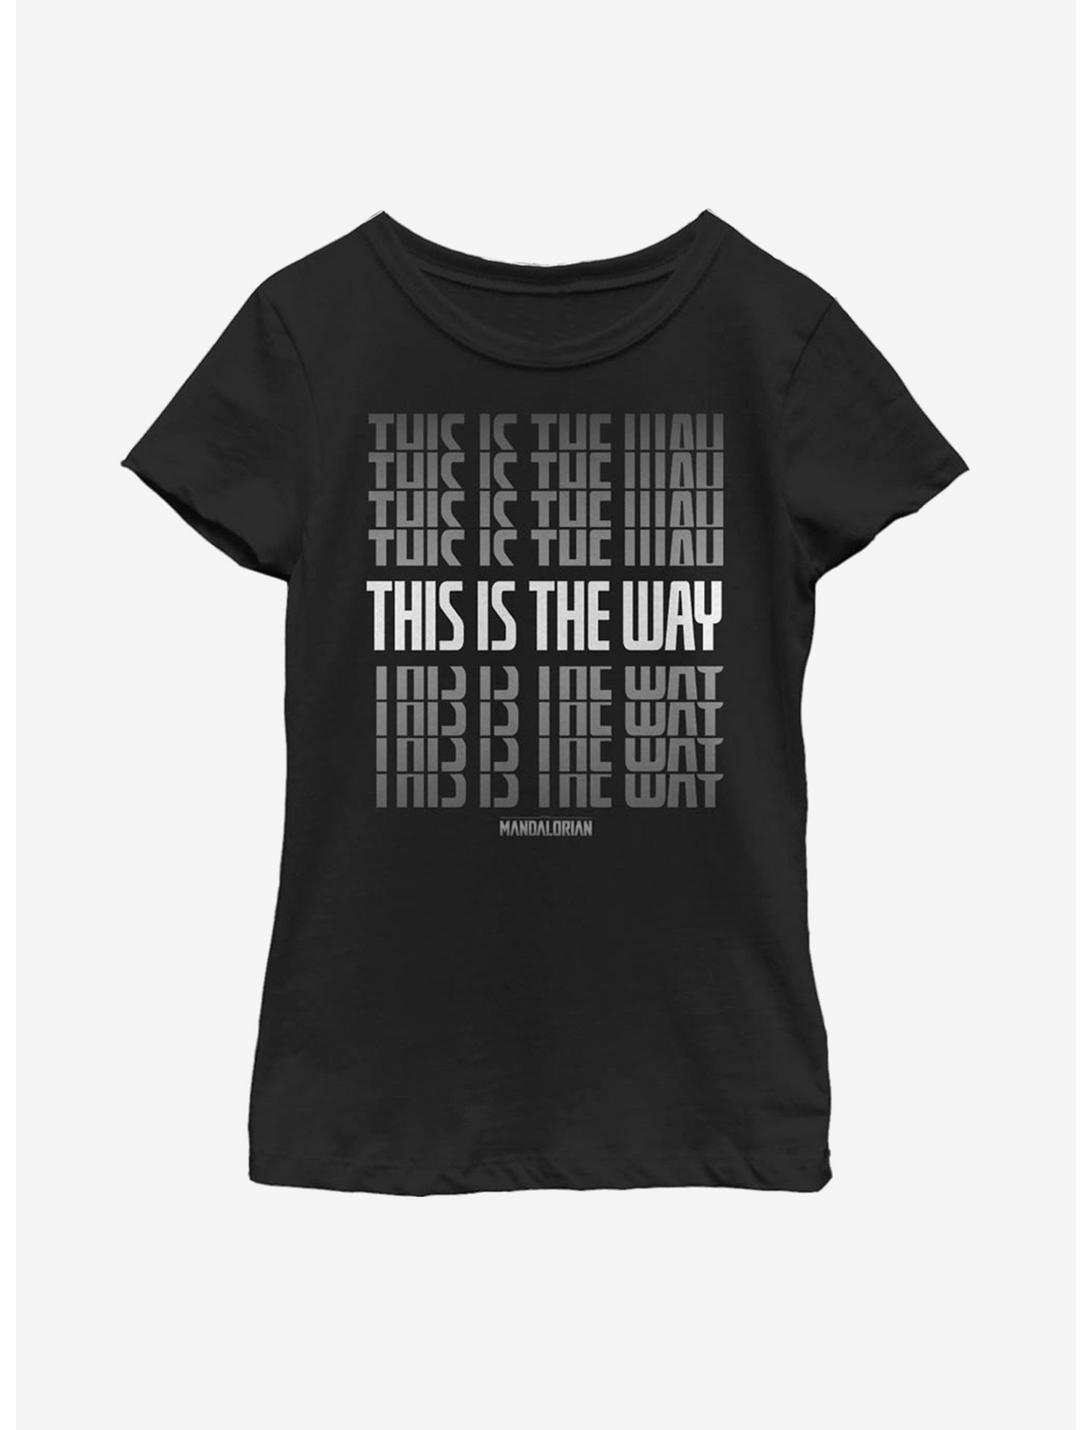 Star Wars The Mandalorian This Is The Way Stack Youth Girls T-Shirt, BLACK, hi-res